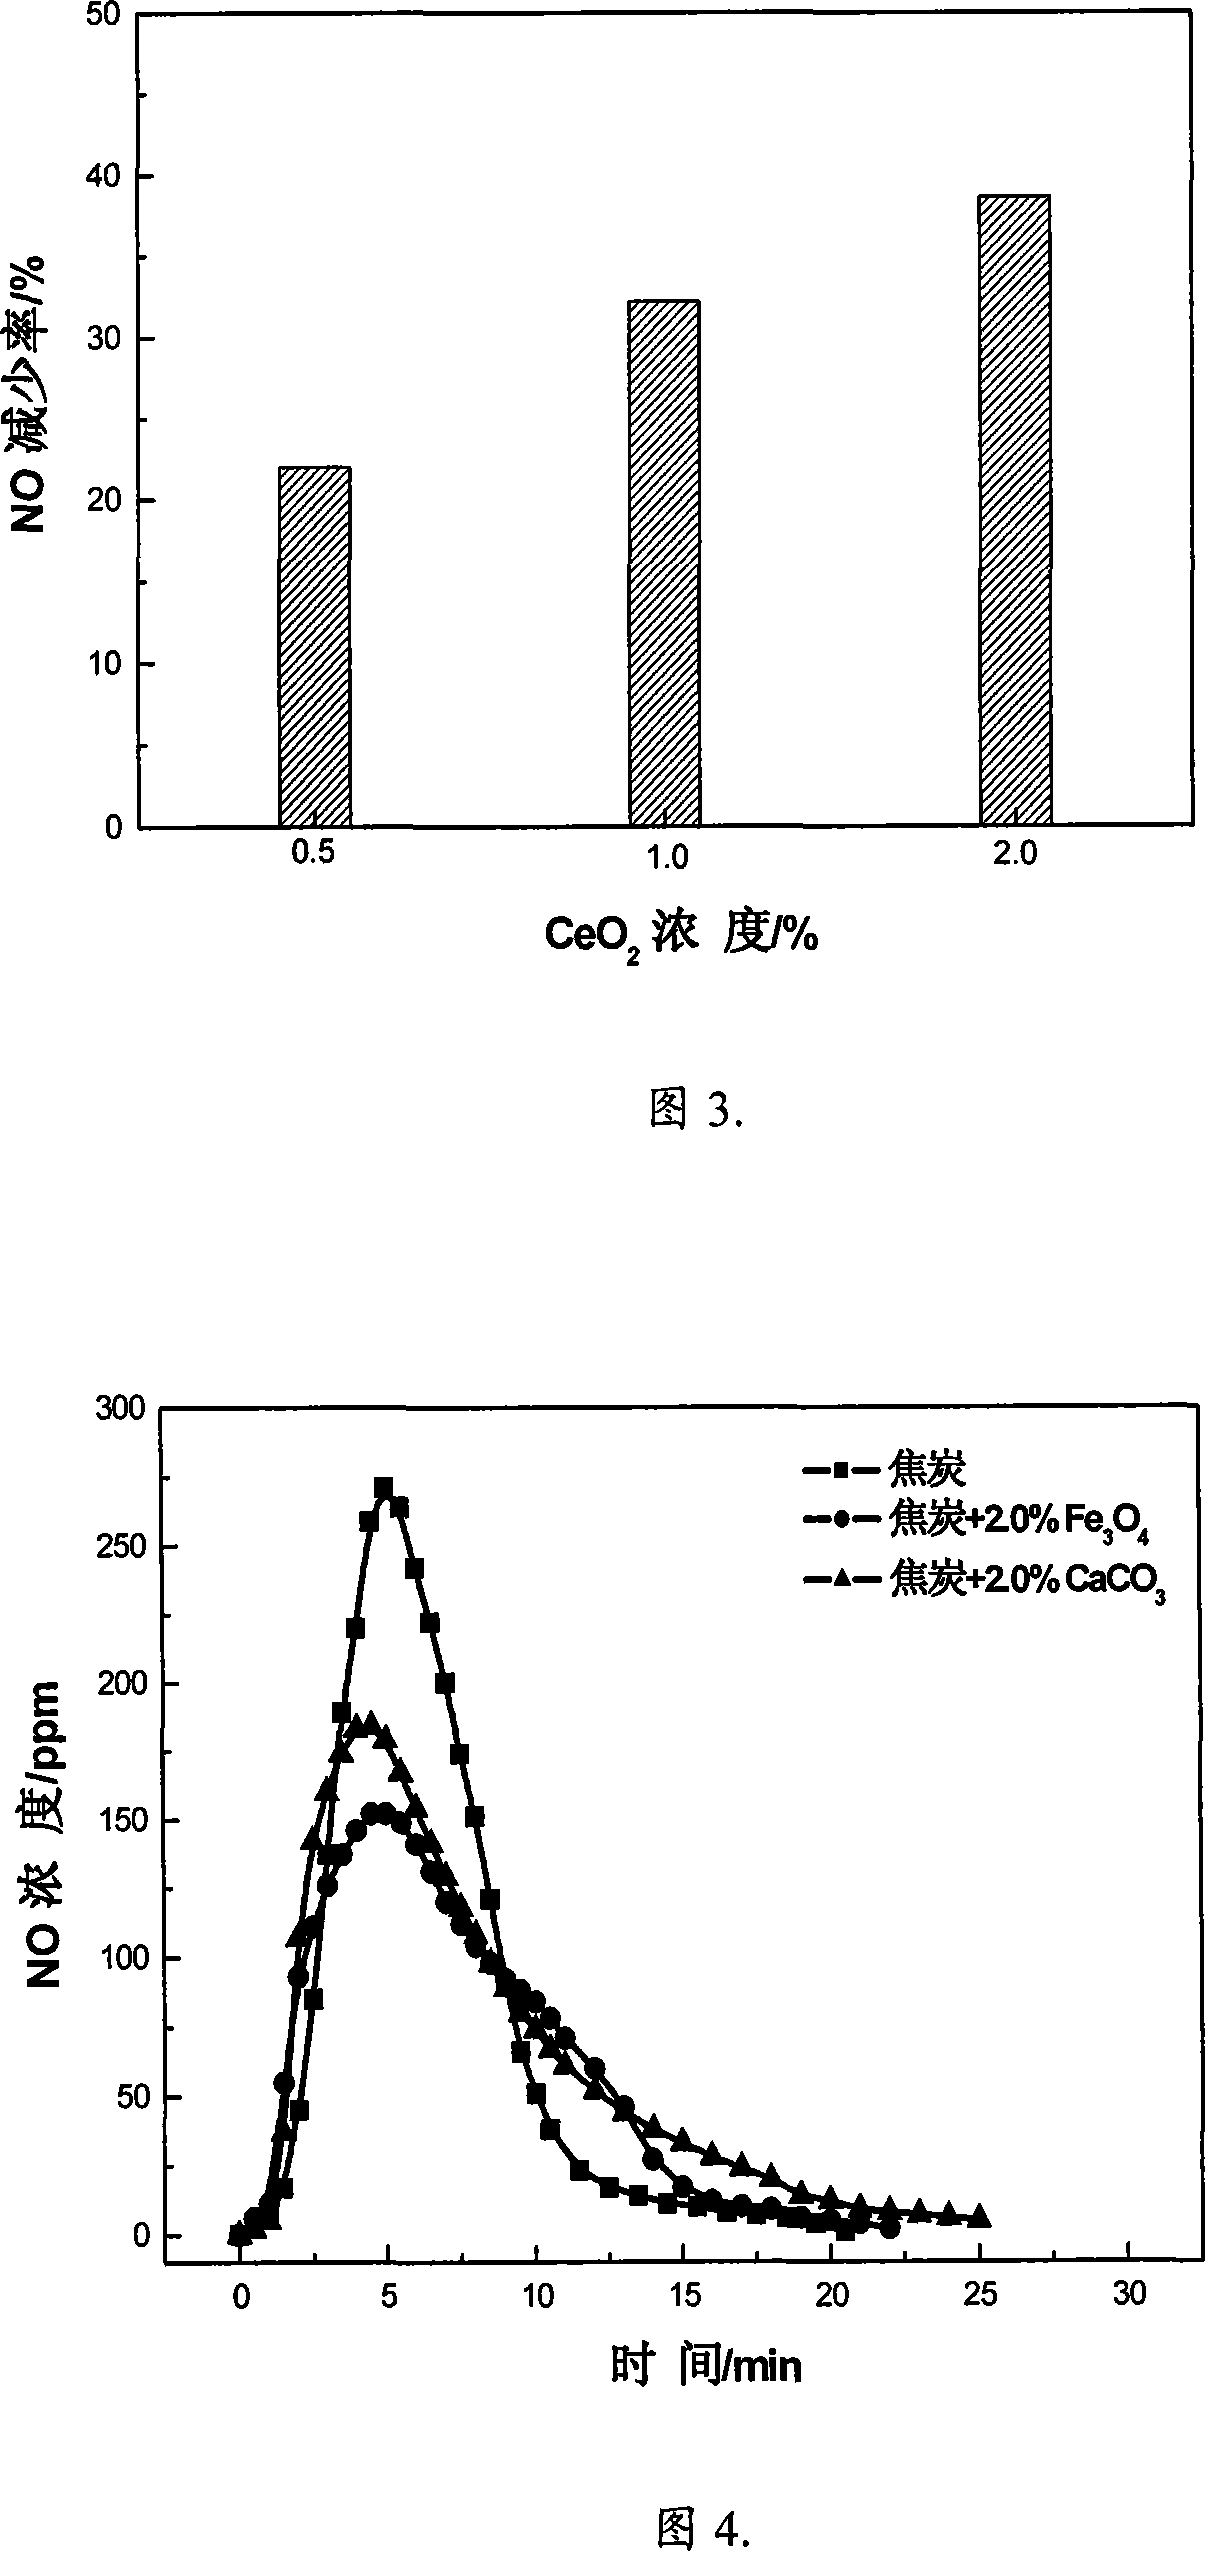 Method for reducing NOx discharge in sintering process by using additive modified coke